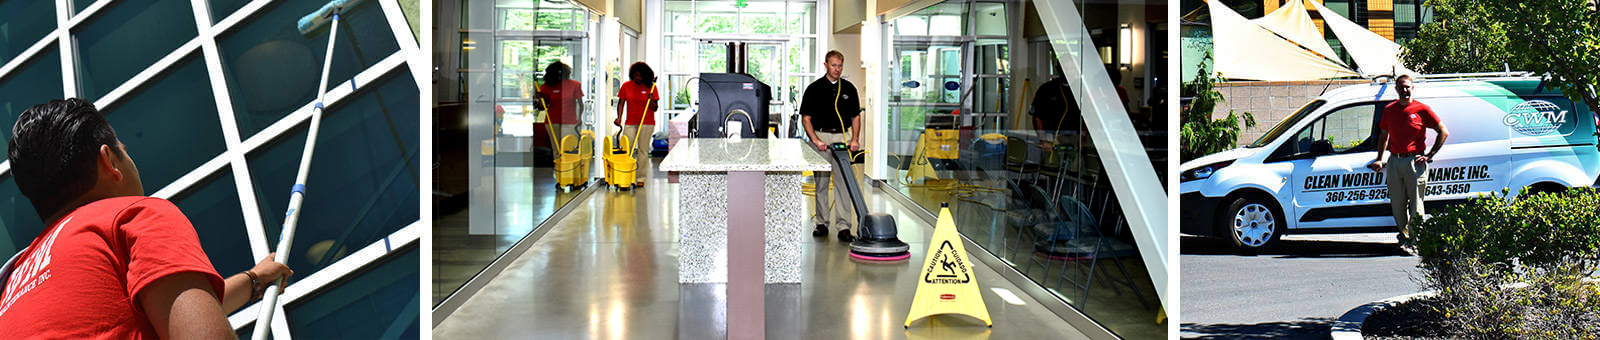 More variety in professional cleaning with Clean World Maintenance